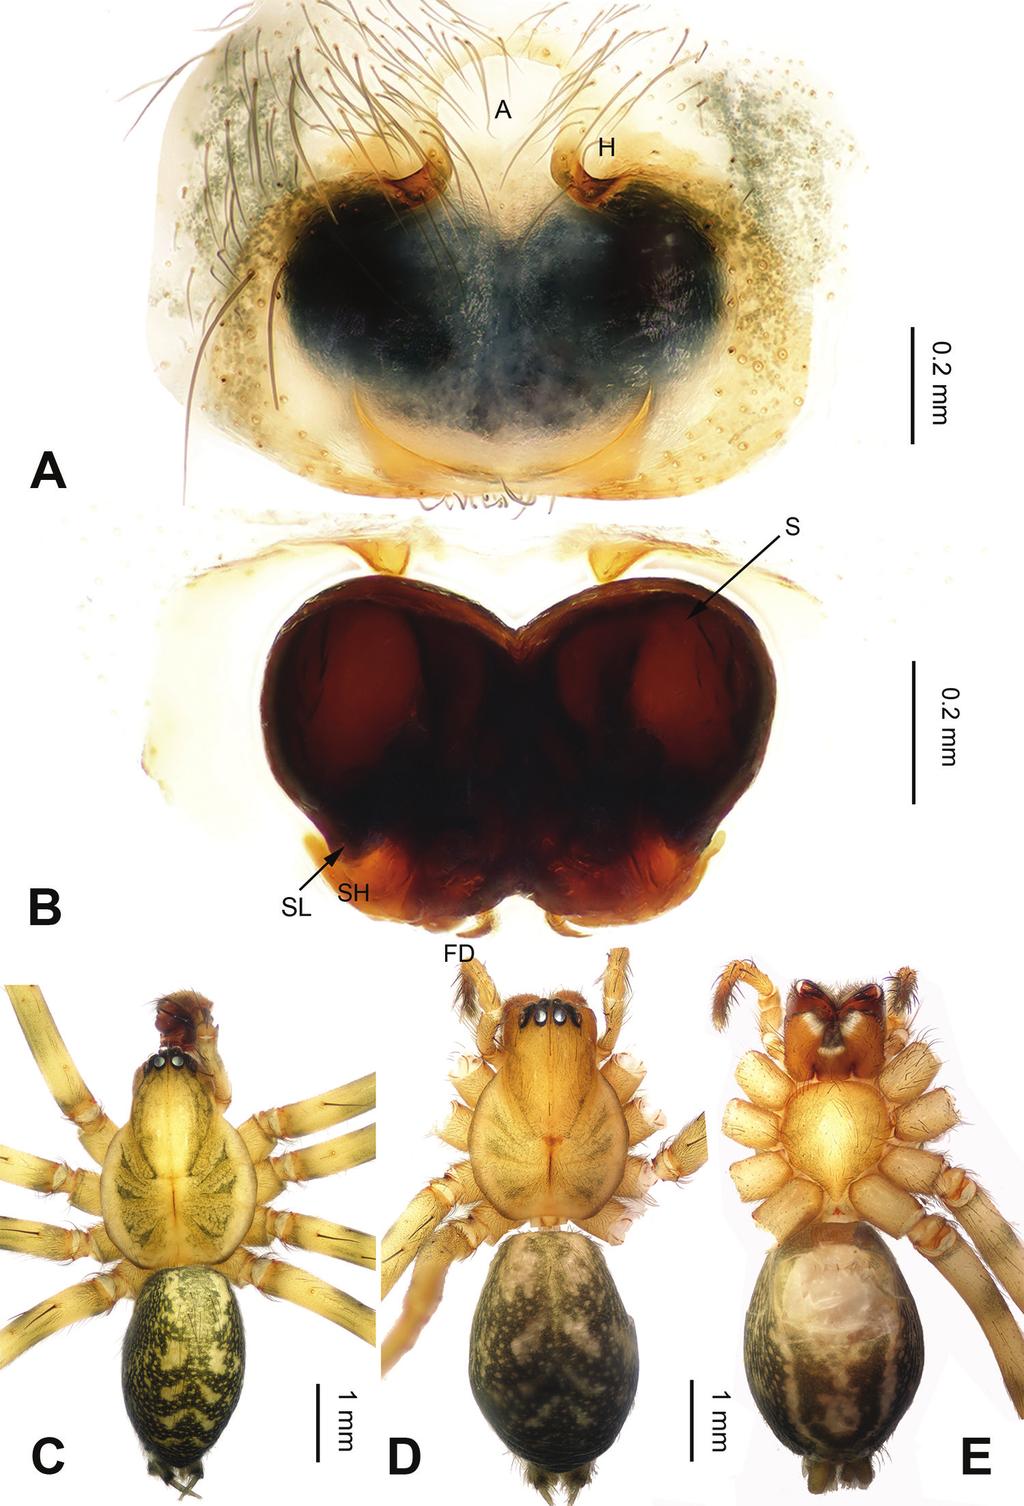 Five new Platocoelotes species (Araneae, Agelenidae) from caves in southern China 13 Figure 8. Platocoelotes tianyangensis sp. n., one paratype female.